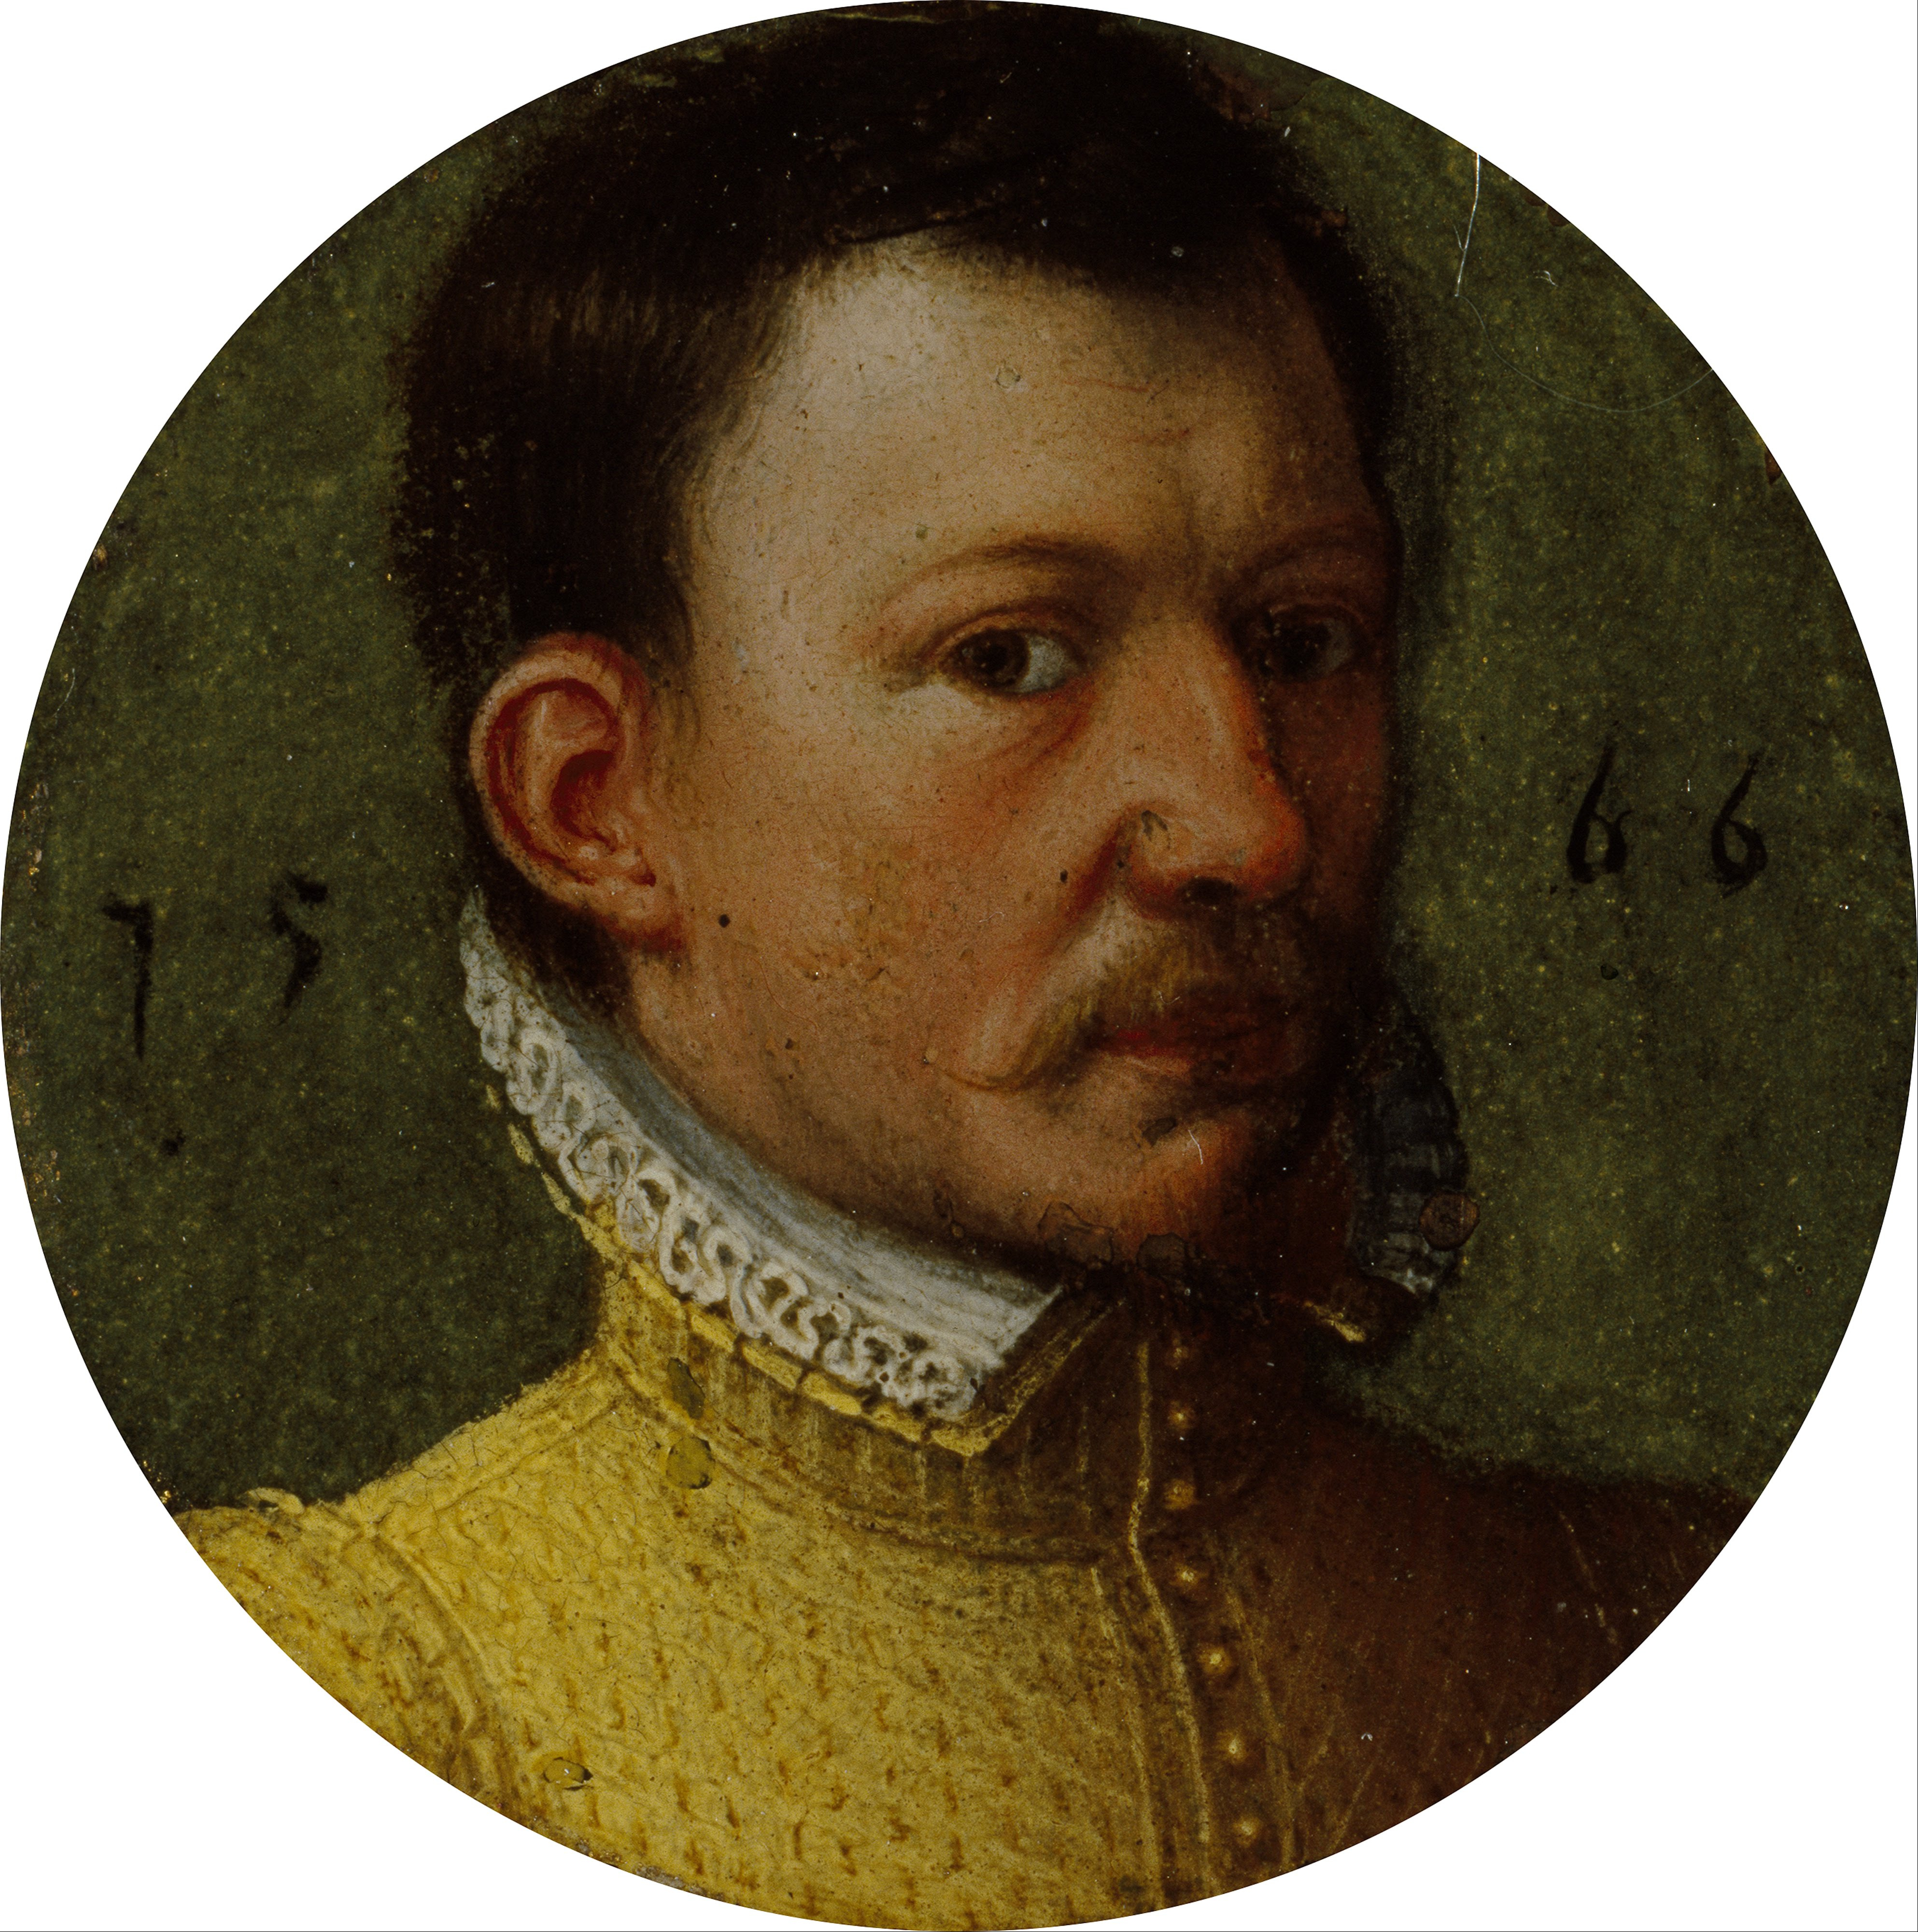 James Hepburn, 4th Earl of Bothwell who abducted Mary in order to marry her. This was his third marriage. His first, which was not dissolved, was to an Norwegian noblewoman who sued for bigamy when Hepburn accidentally came to Norway after fleeing Scotland. 